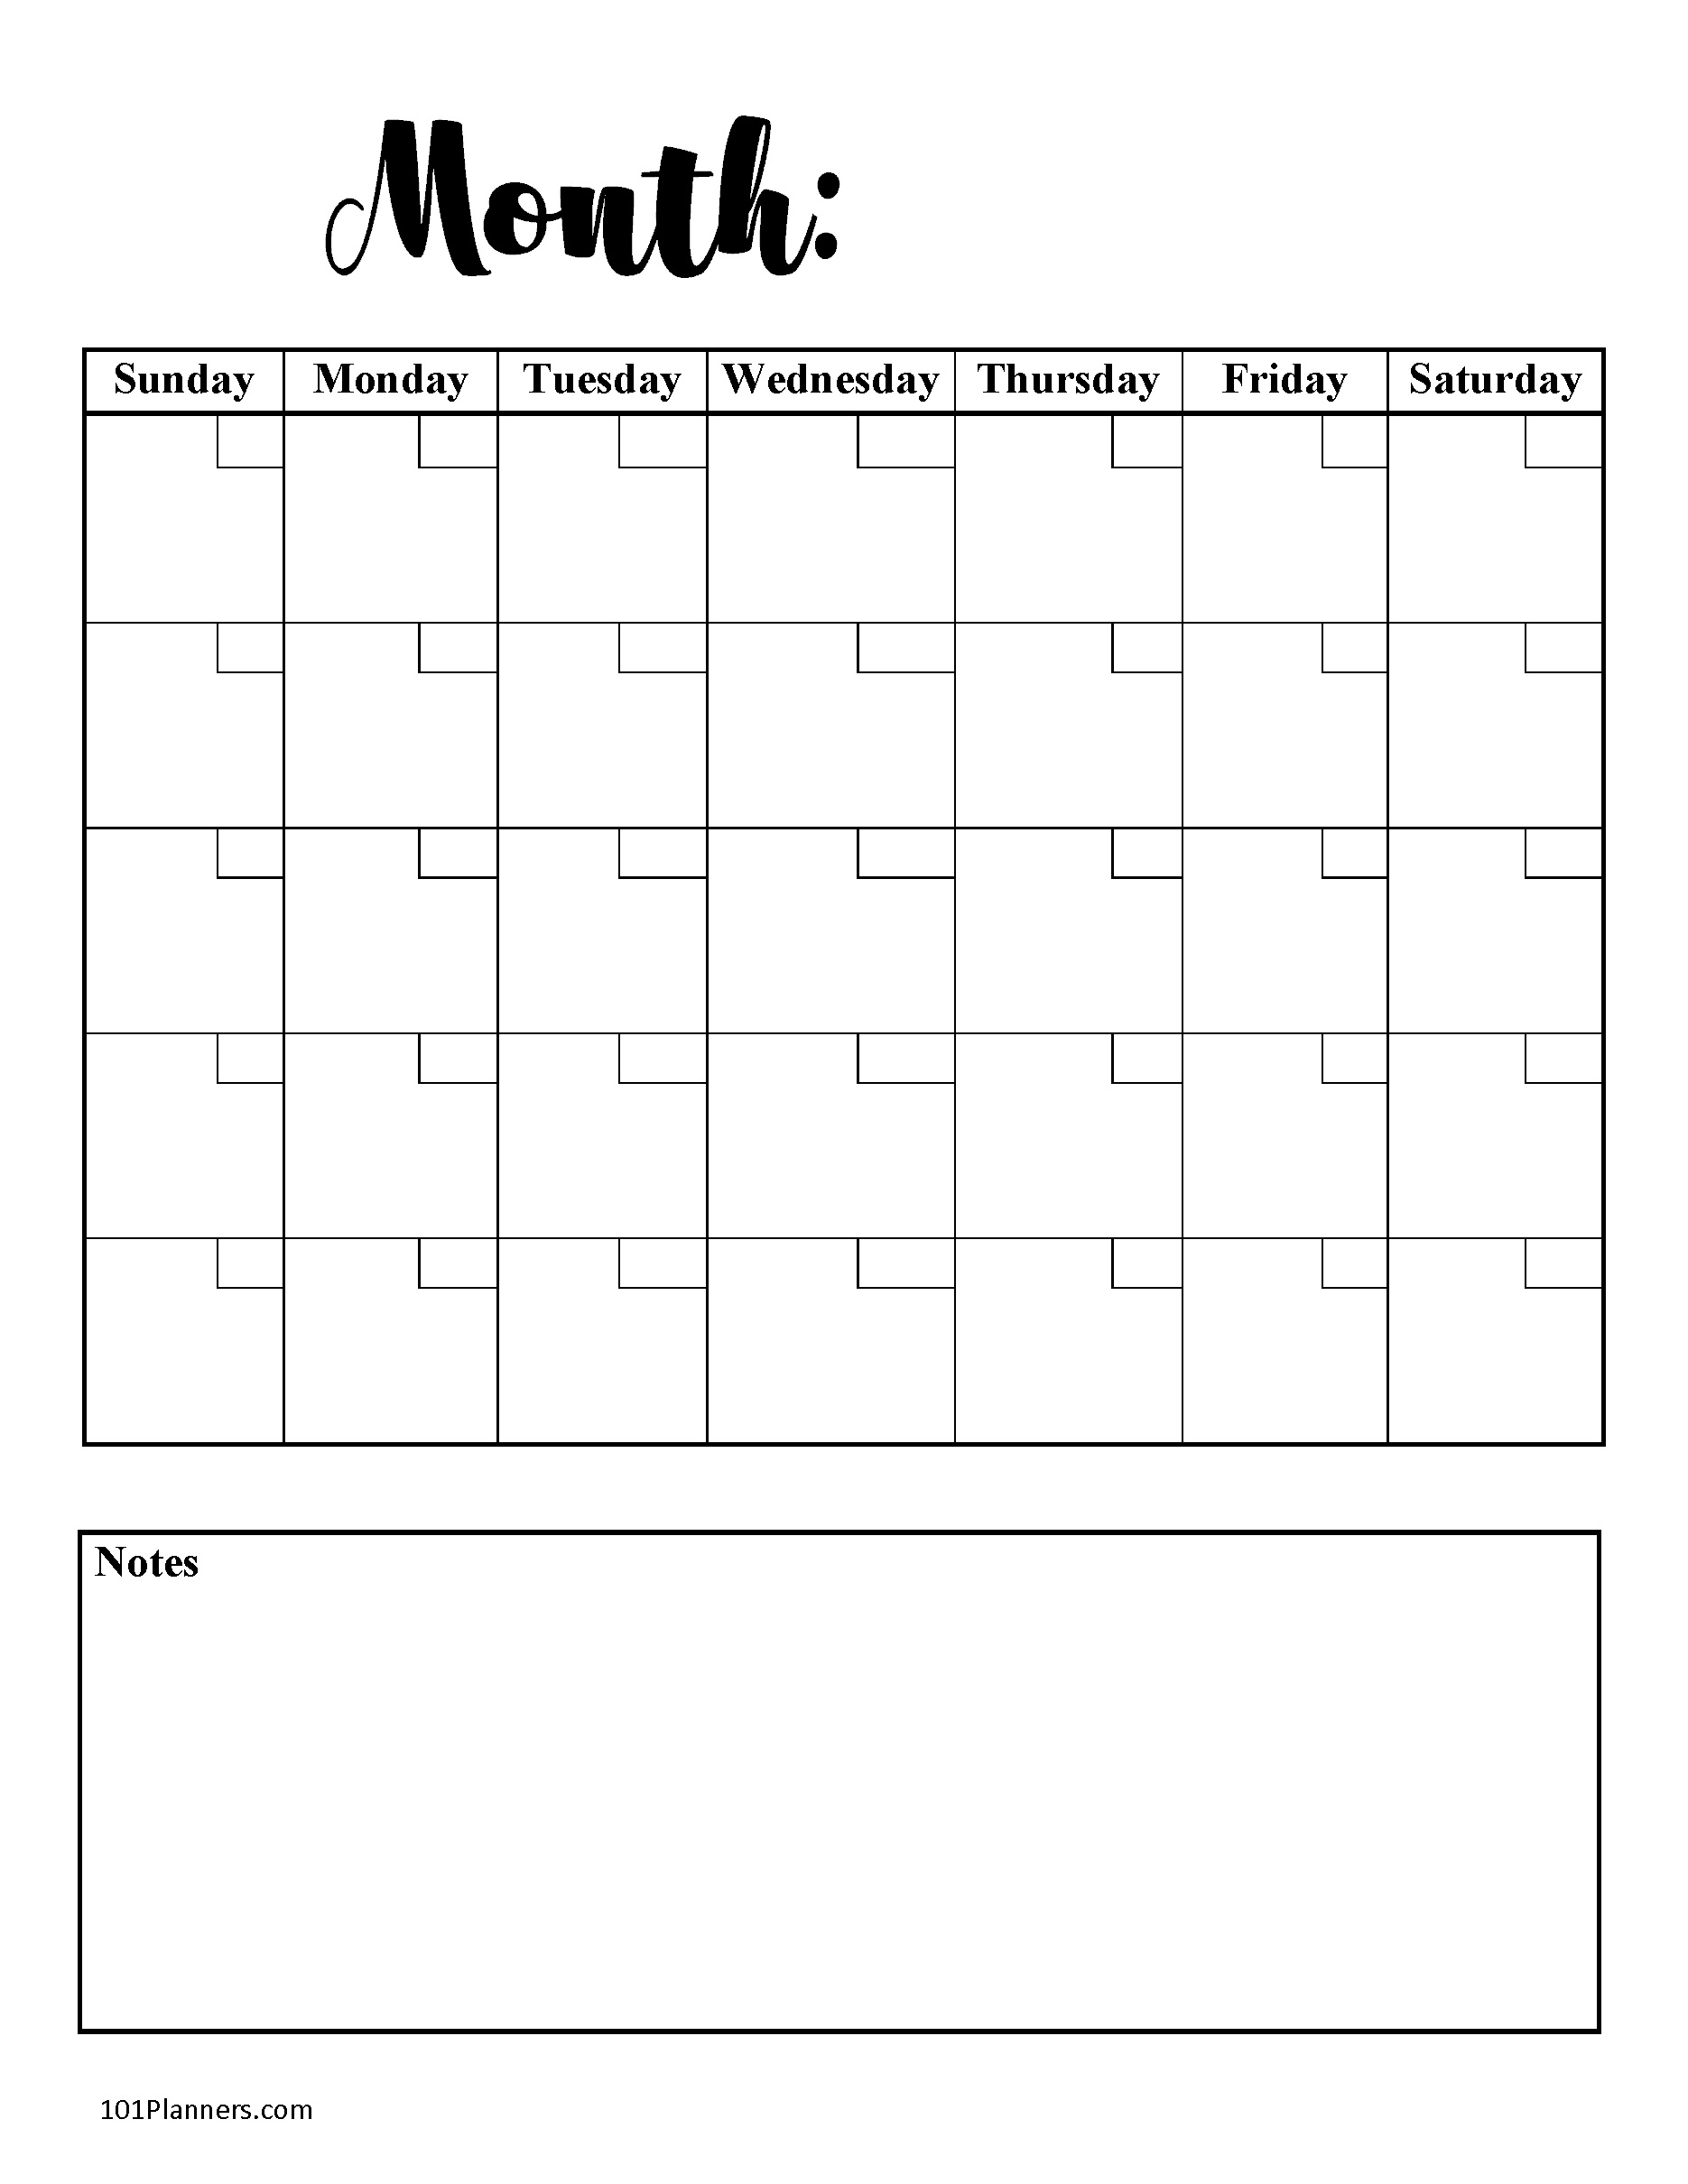 ruled monthly calendar template 21